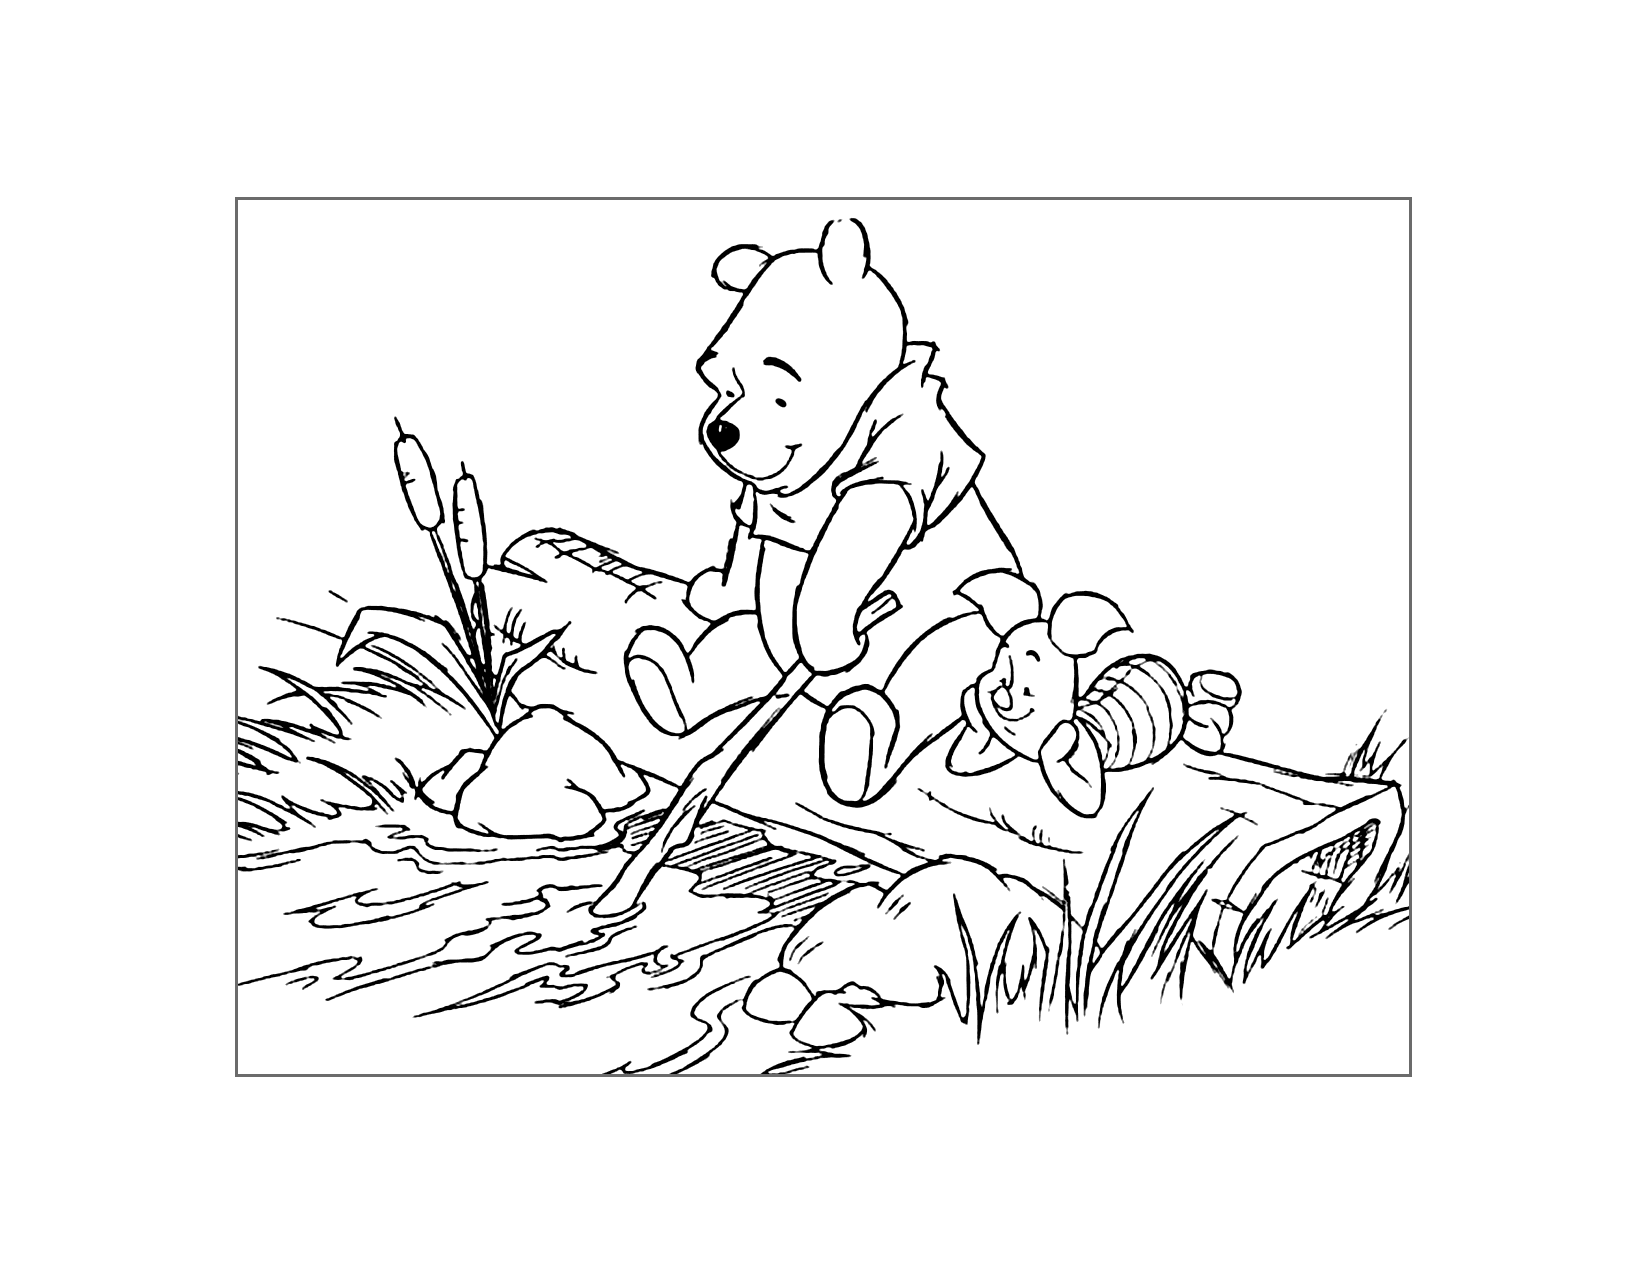 Pooh And Piglet Hang Out By A Stream Coloring Page